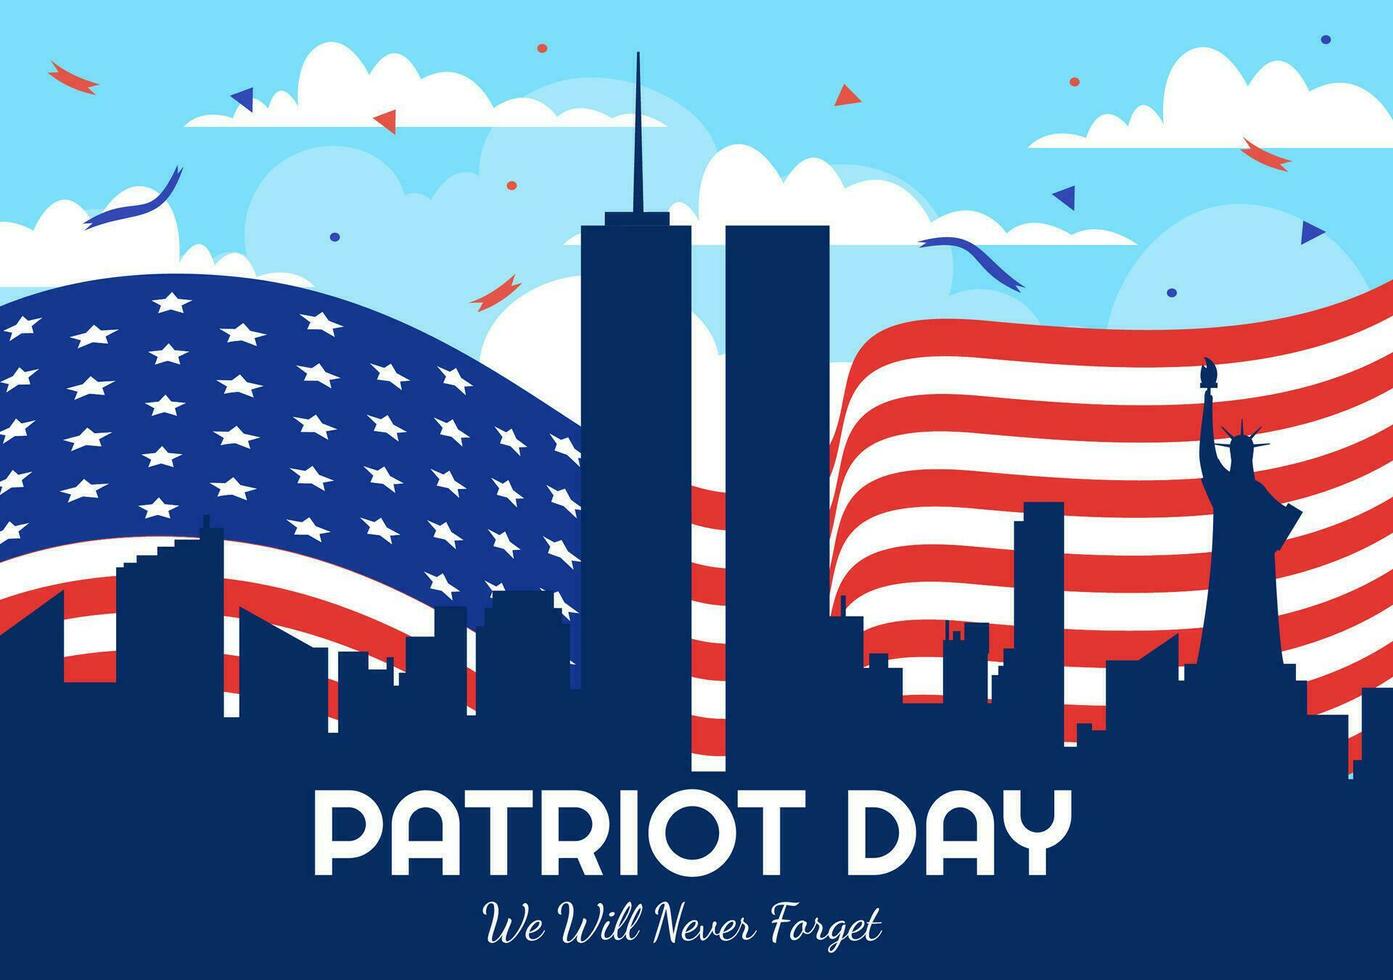 Happy USA Patriot Day Vector Illustration with United States Flag, 911 Memorial and We Will Never Forget Background Design Hand Drawn Templates